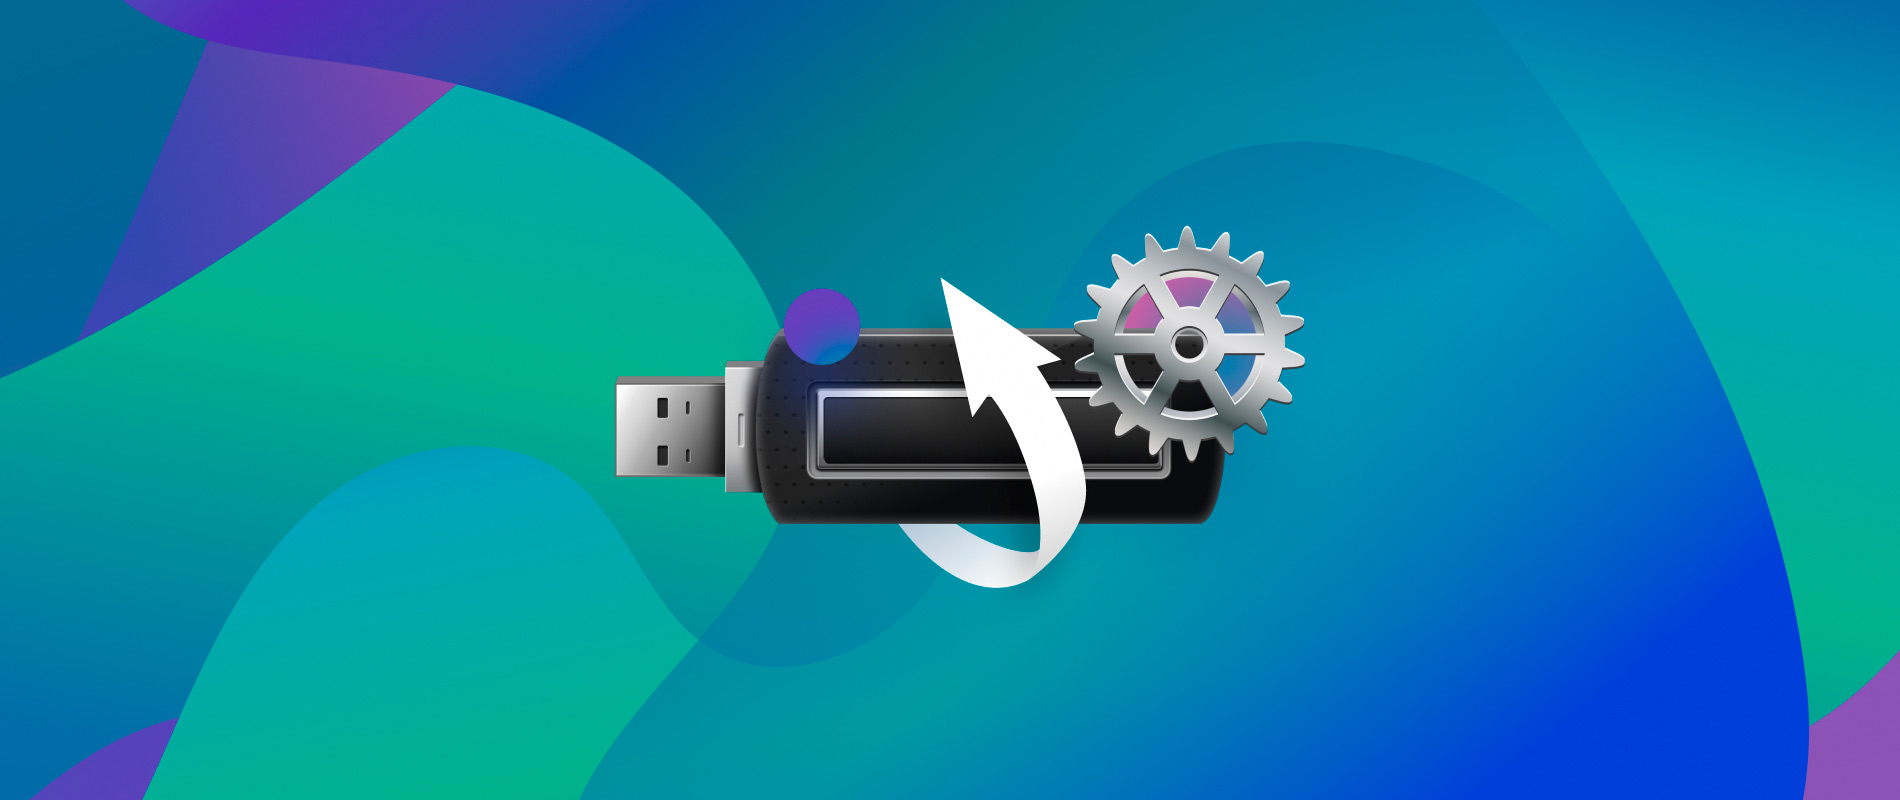 The 8 Best USB Flash Drive Tools in